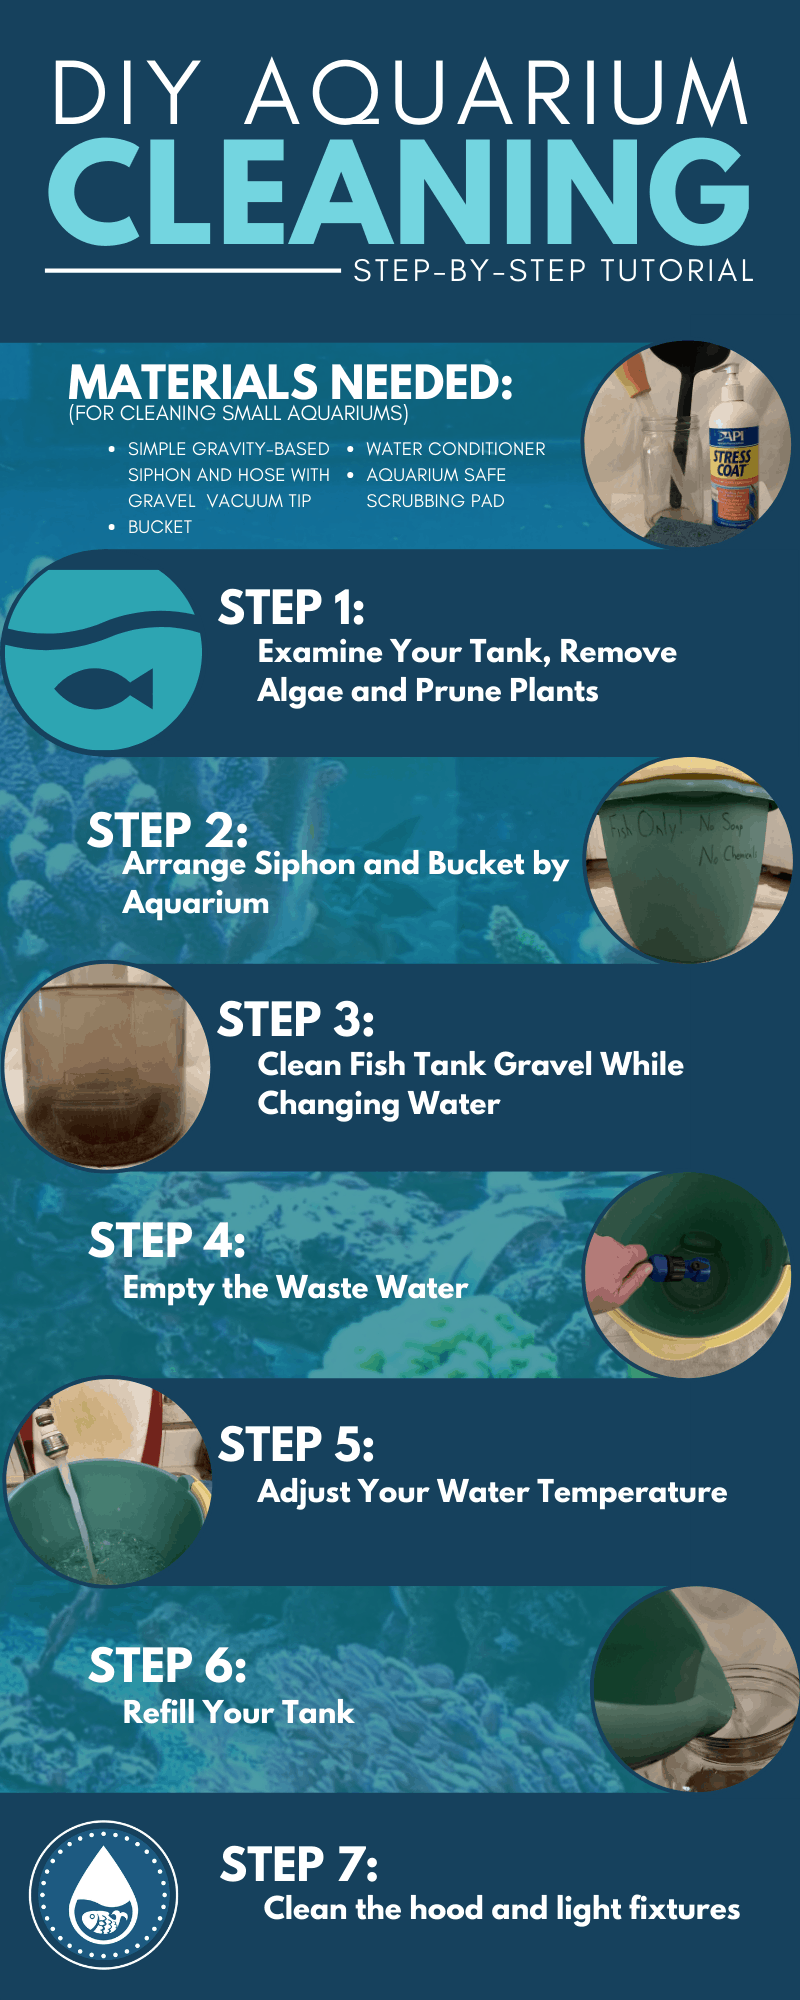 DIY Aquarium Cleaning—Step-by-Step Tutorial - Infographic